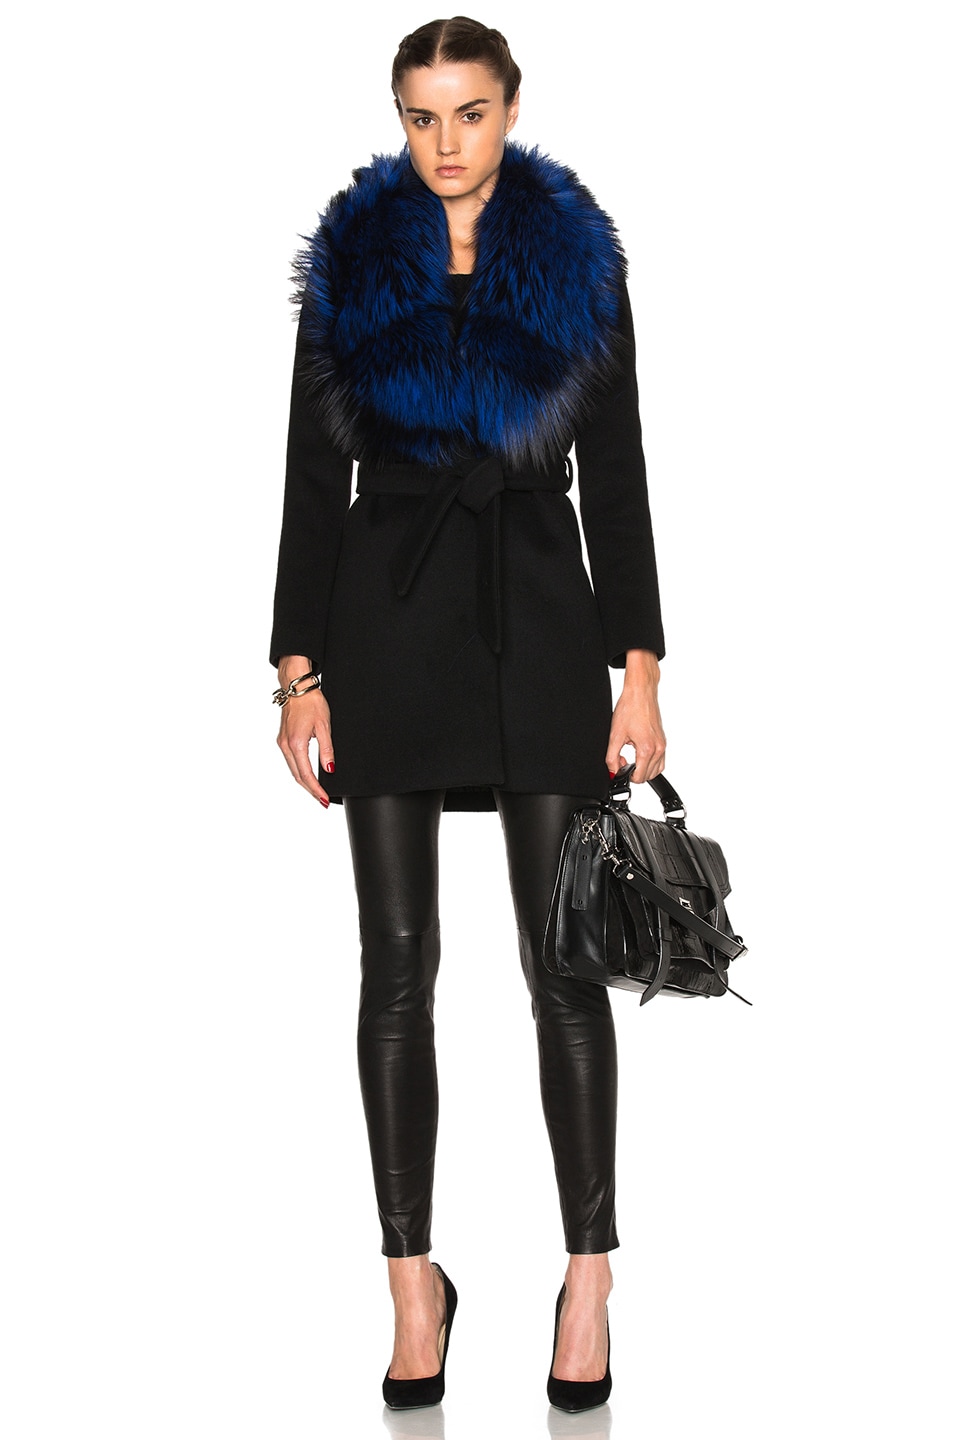 Image 1 of ThePerfext for FWRD Vanessa Coat with Fox Fur Collar in Black & Electric Blue